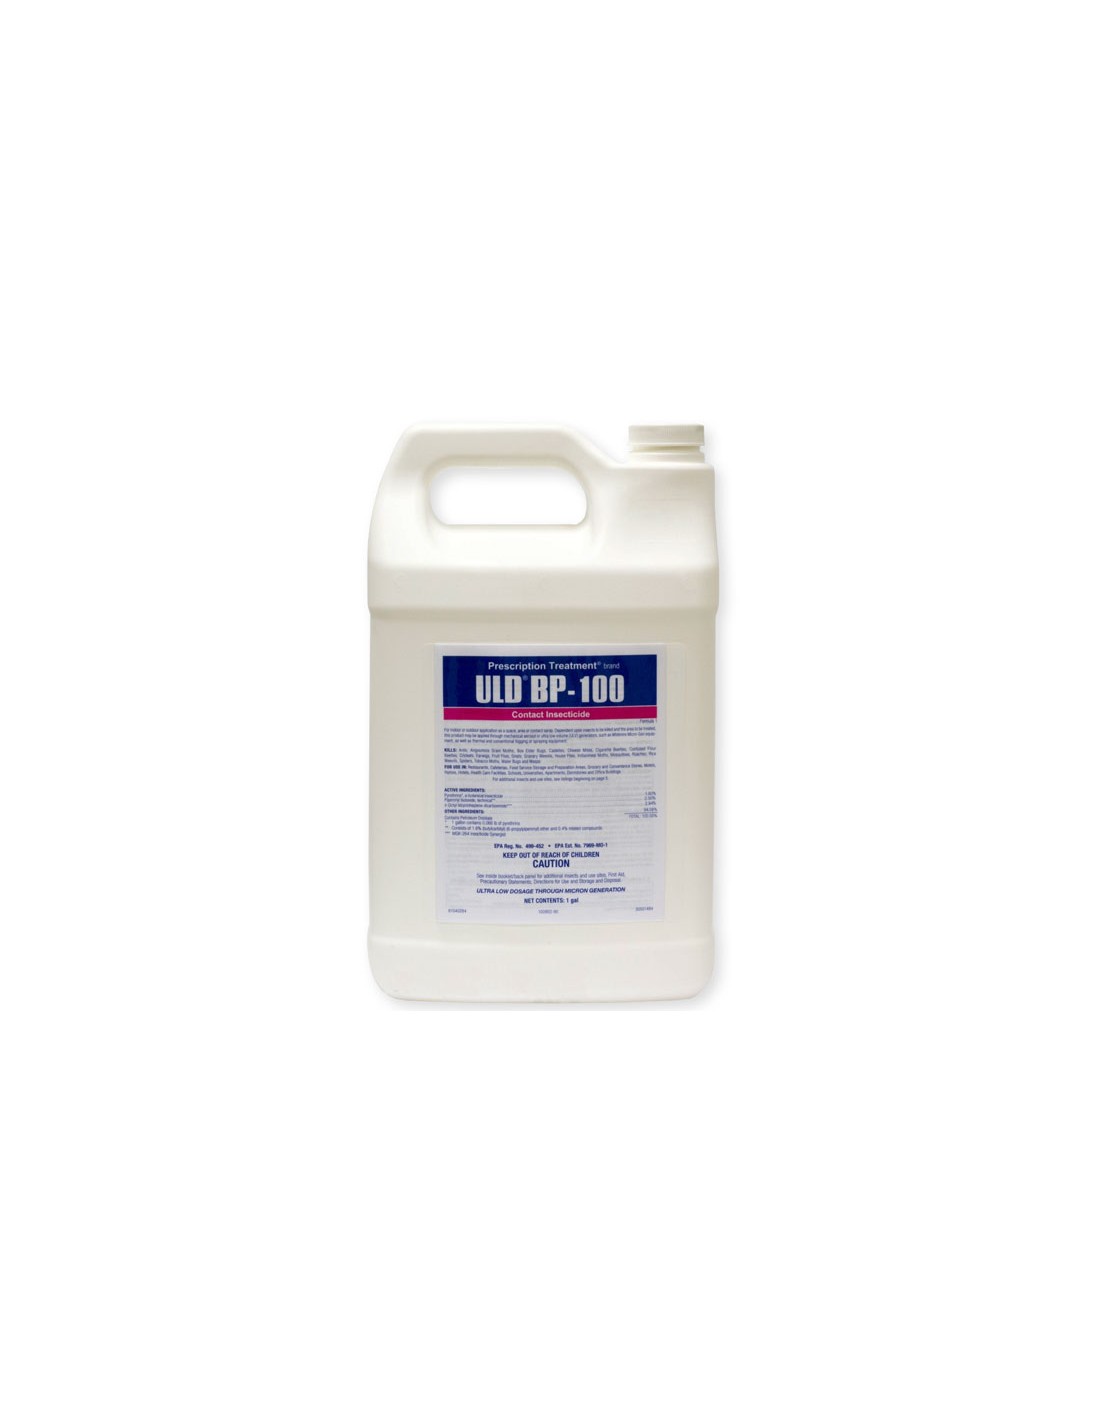 ULD BP 100 Contact Insecticide Formula II Questions & Answers